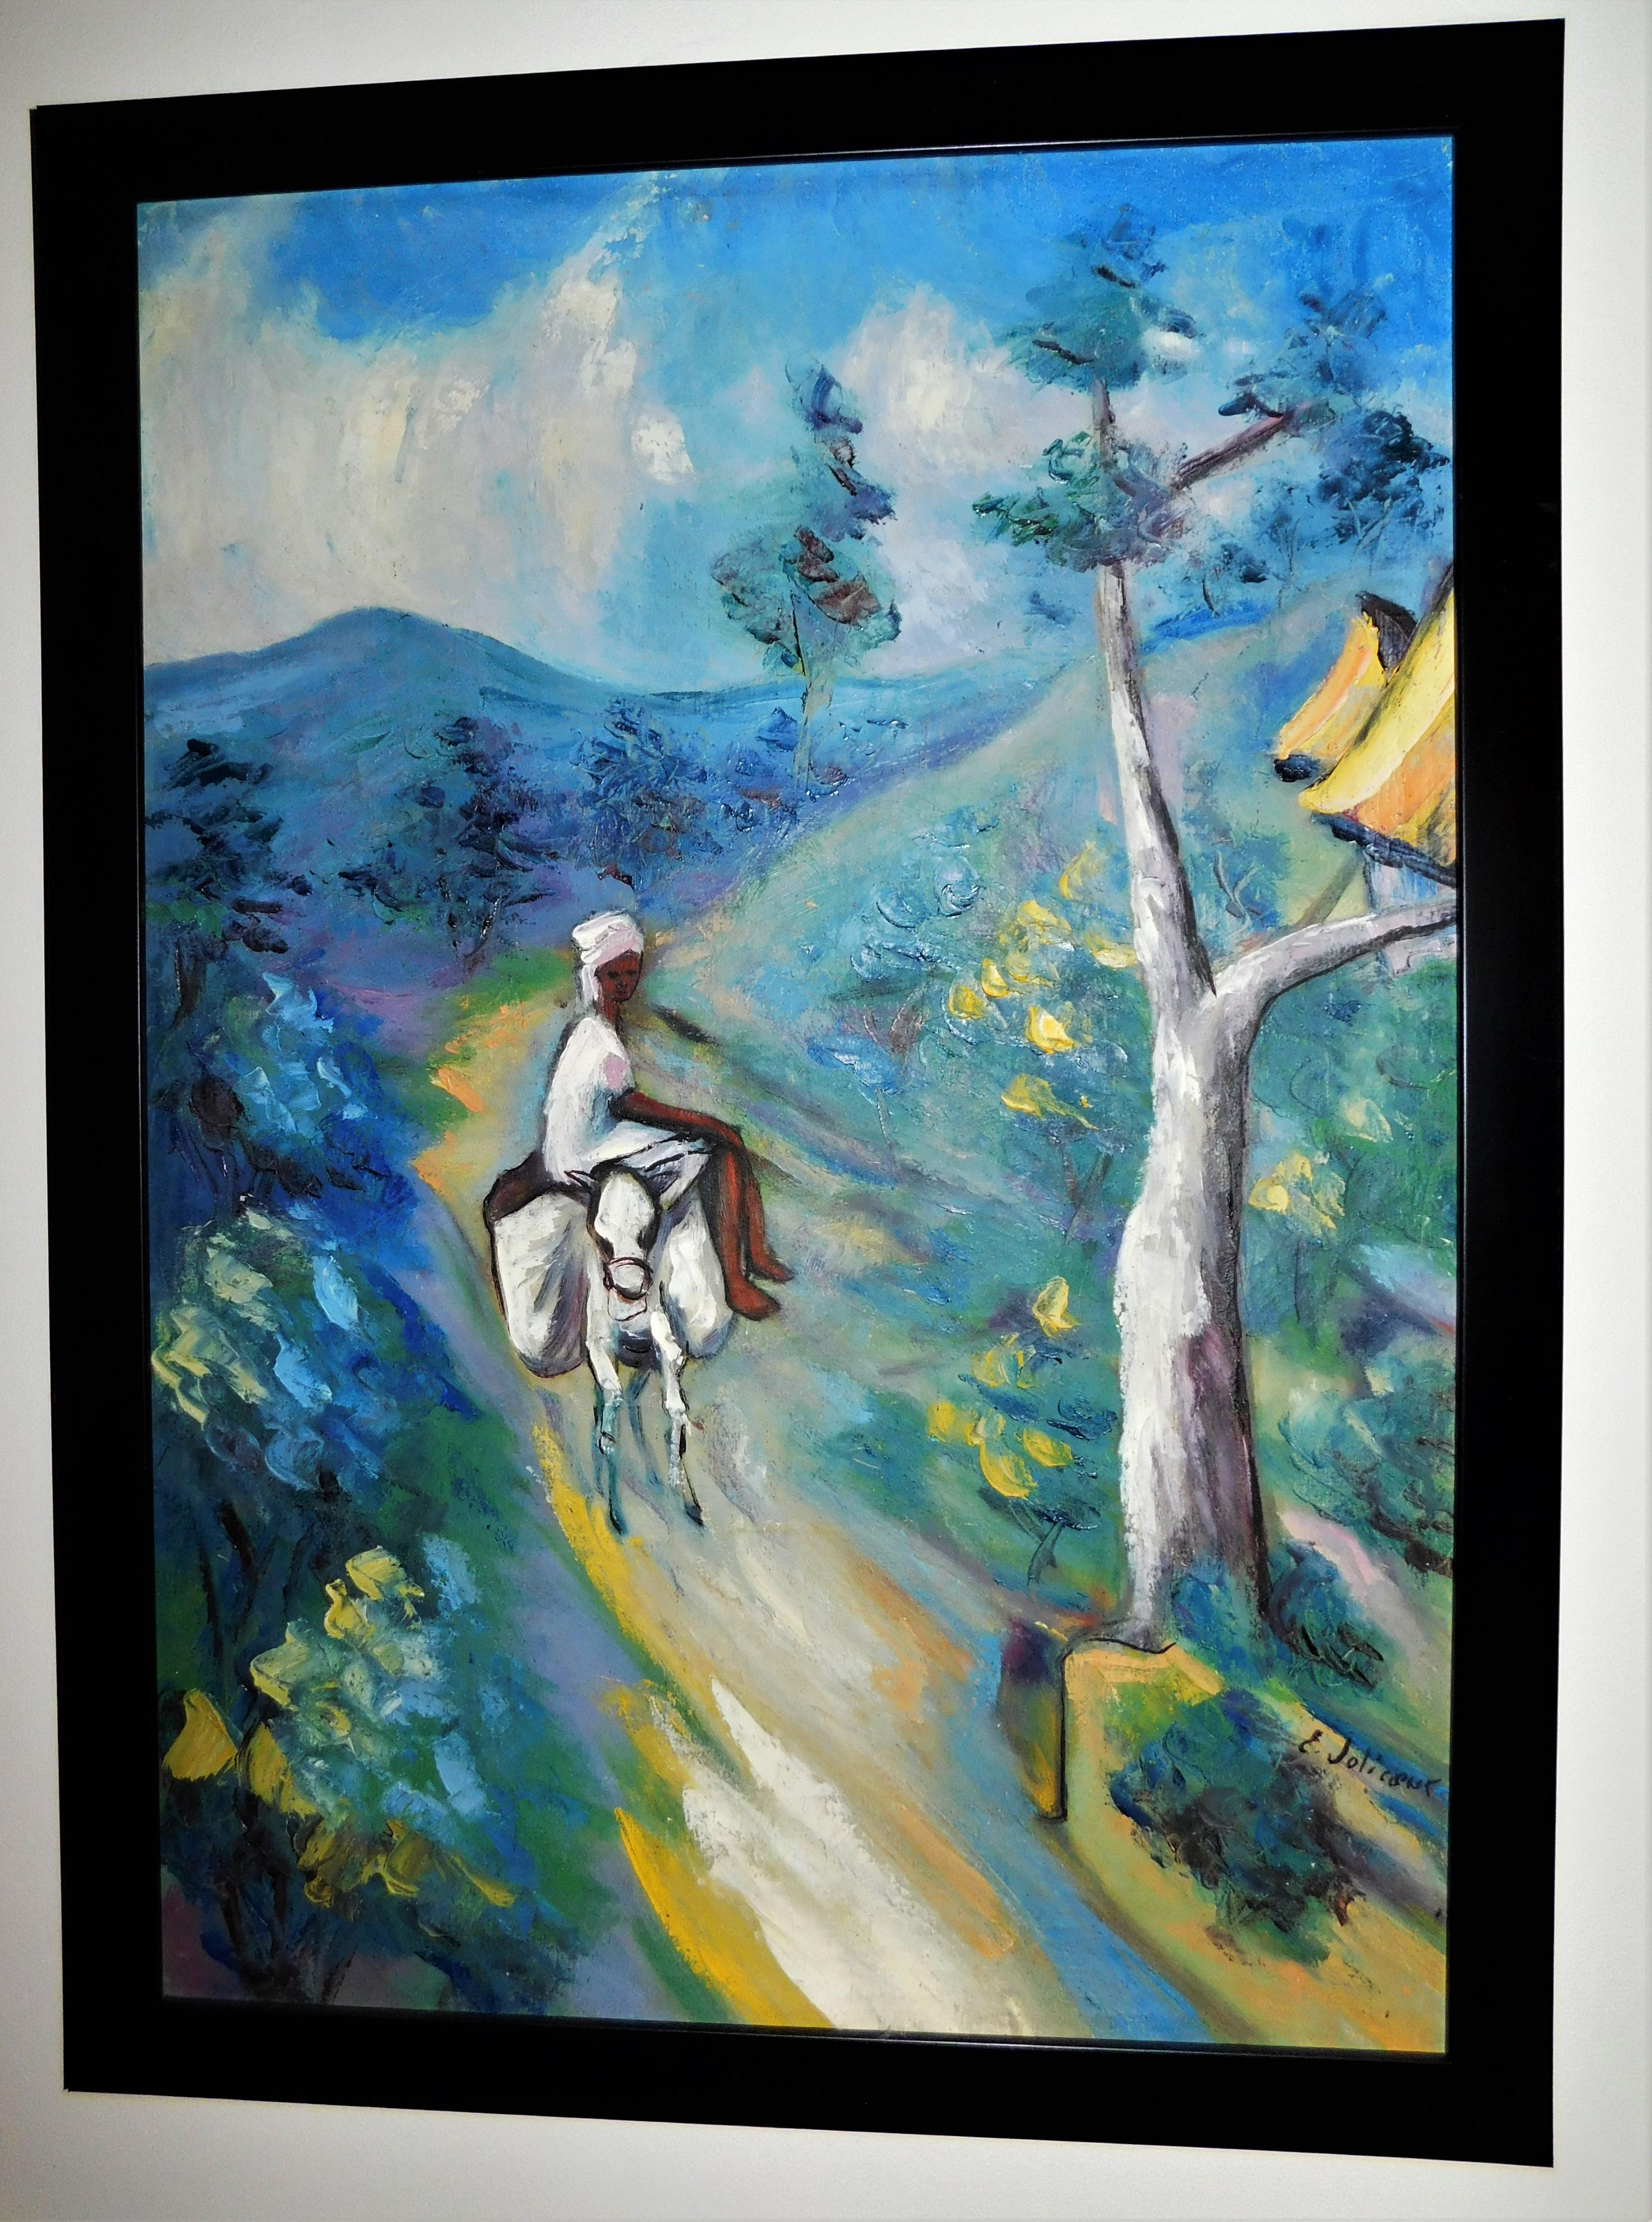 Colorful 1950's Emmanuel Jolicoeur framed original oil painting on canvas signed by artist. Actual painting size 25.75